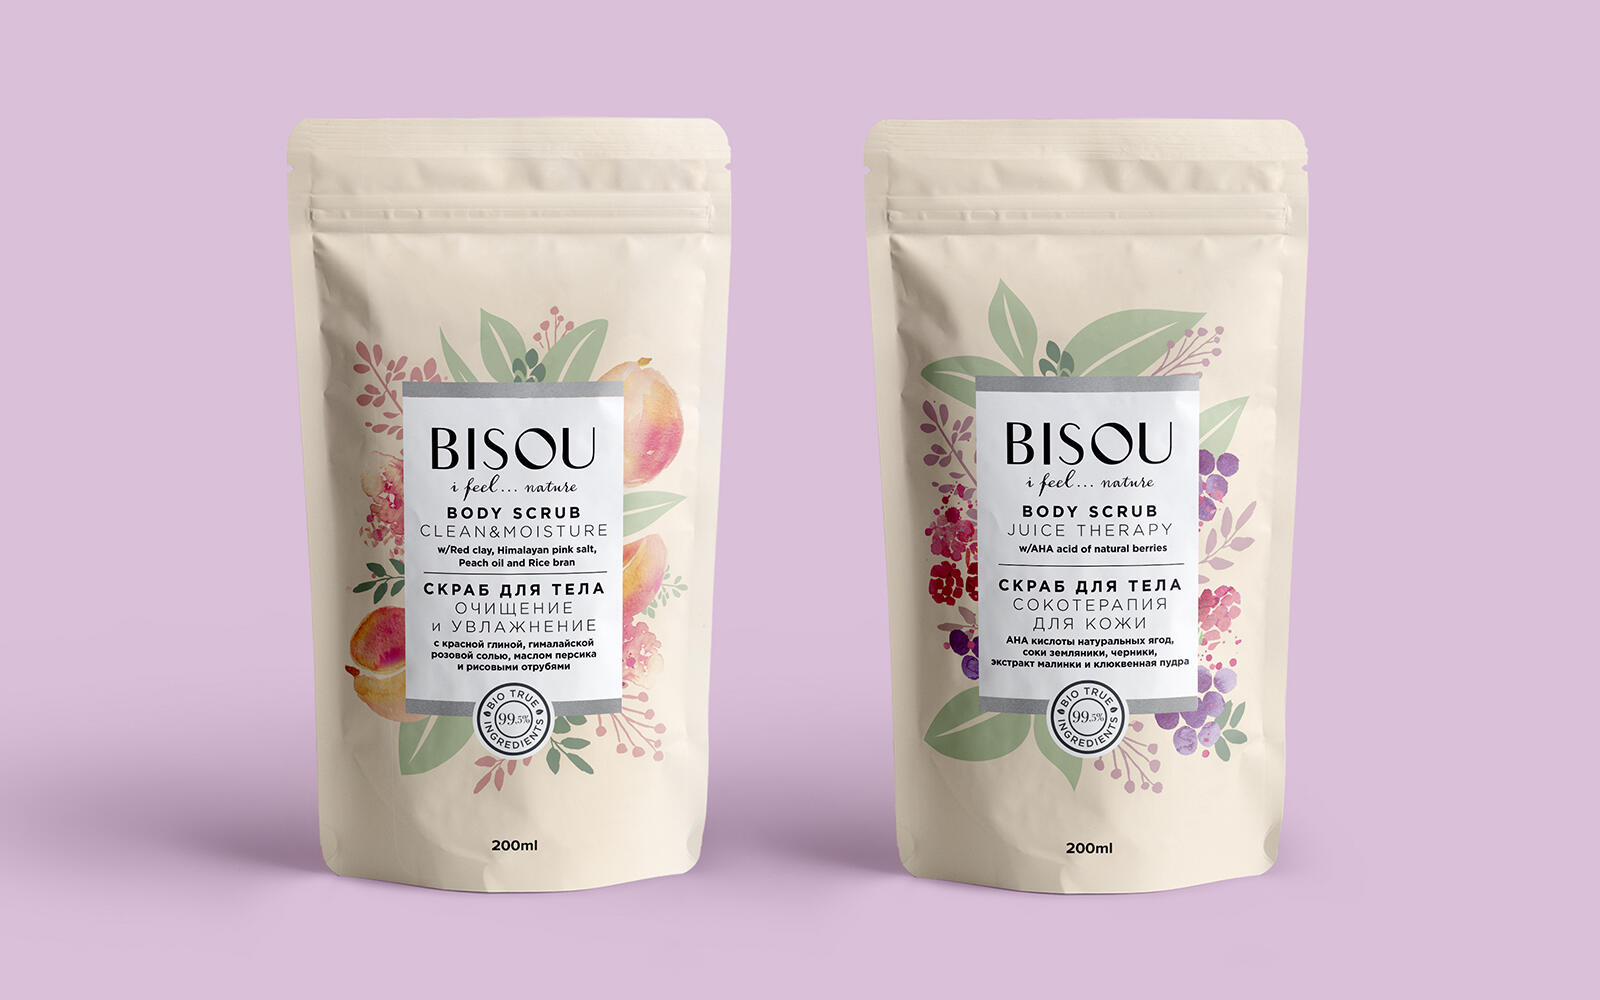 BISOU — brand of natural cosmetics – Packaging Of The World